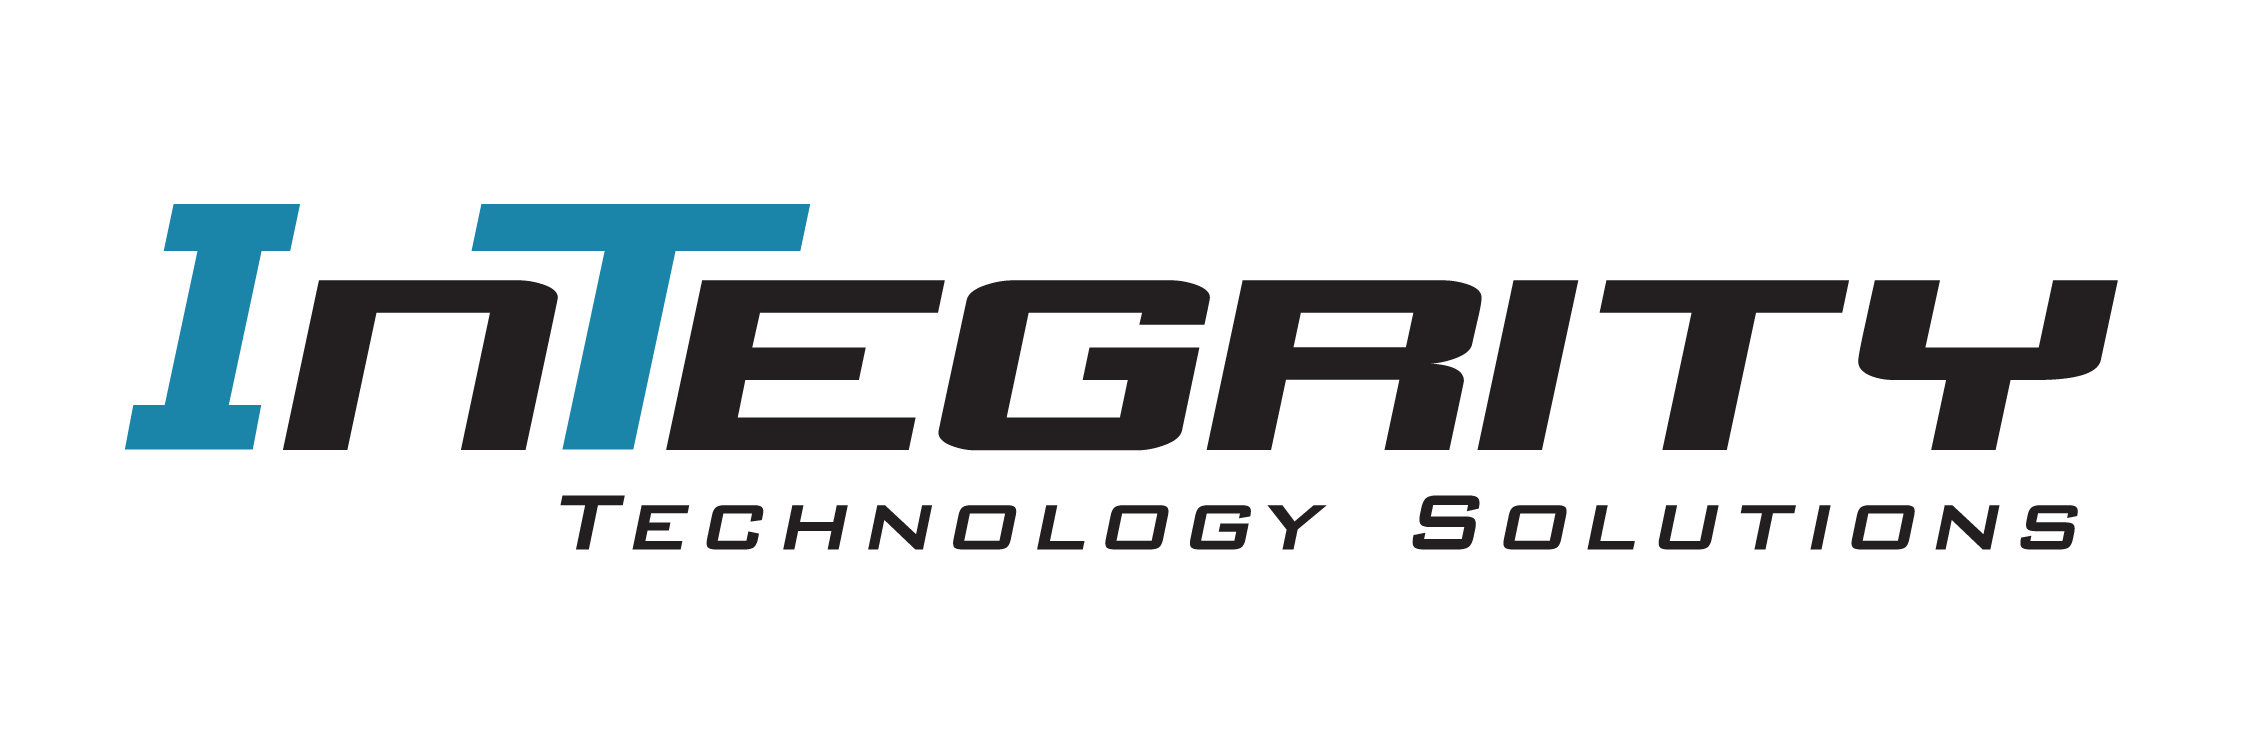 Integrity Technology Solutions logo